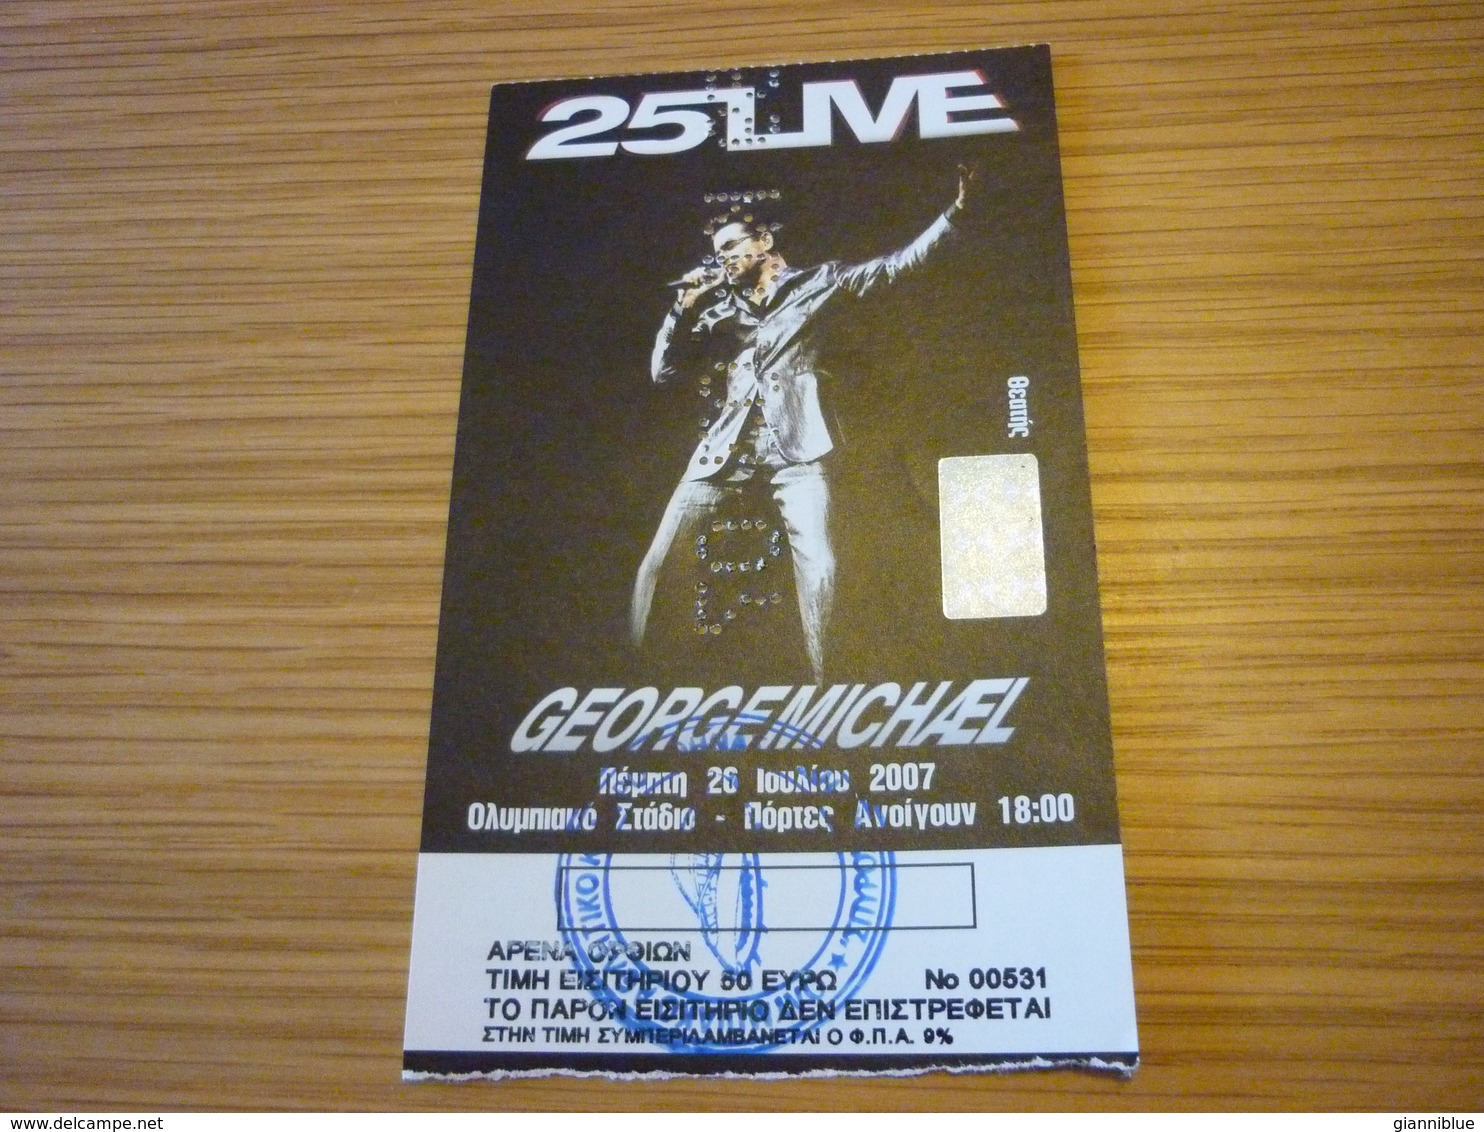 George Michael Ticket D'entree Music Concert In Athens Greece 2007 25 Live Tour - Concerttickets